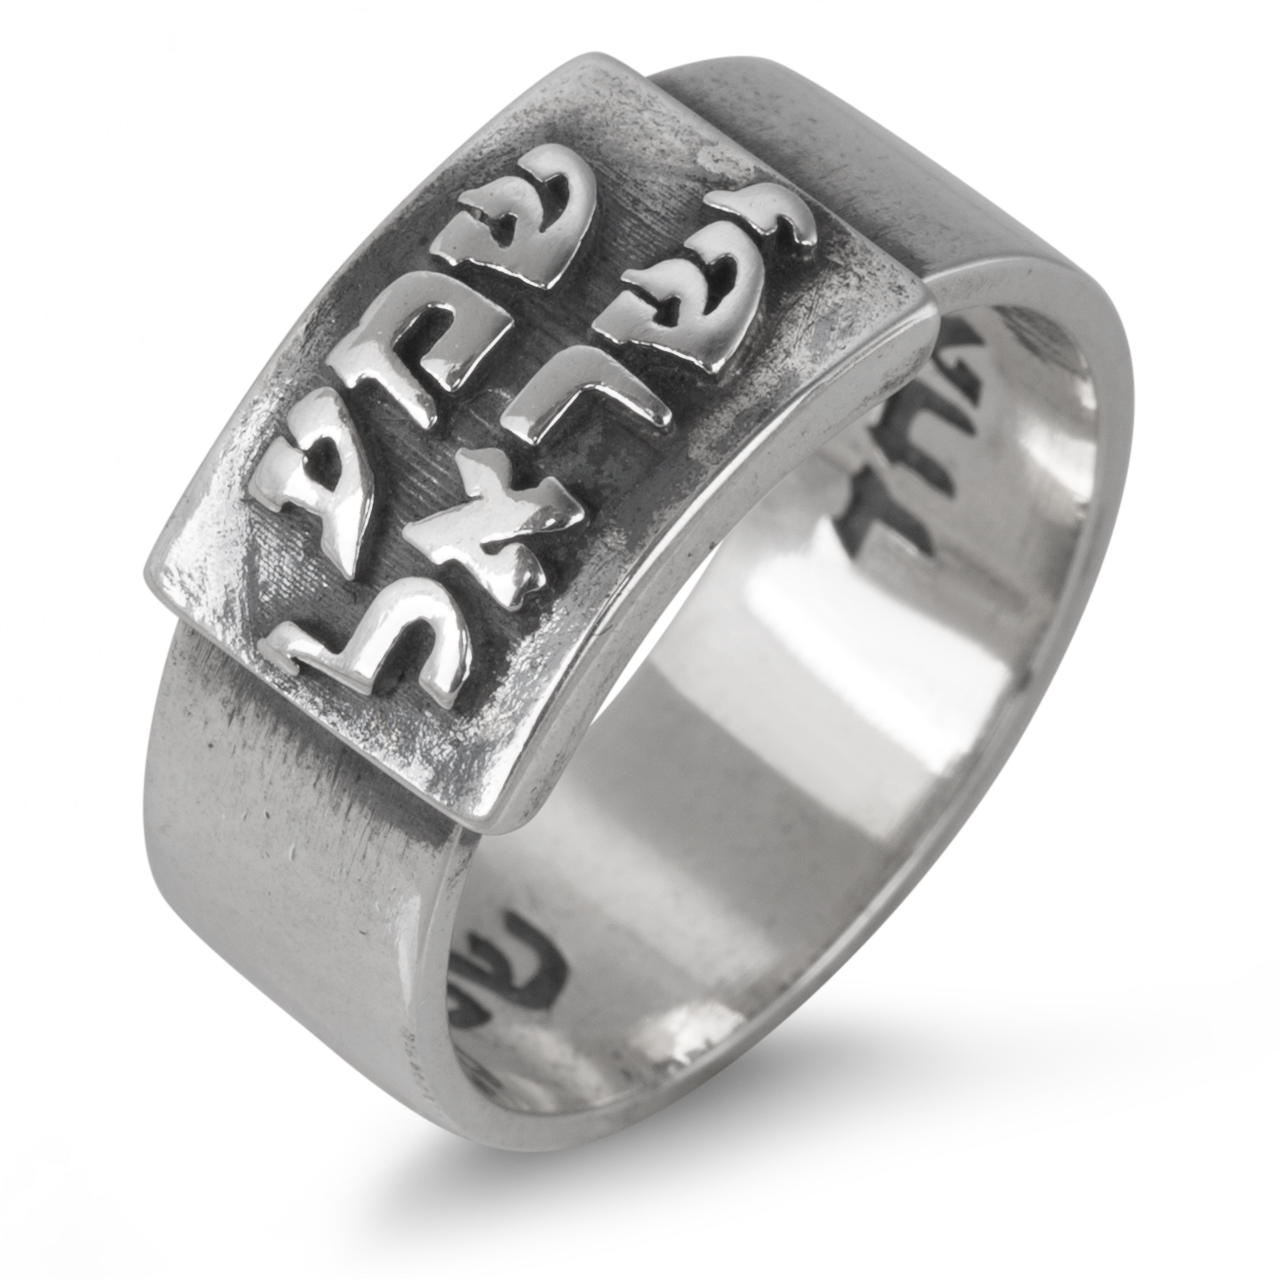 Sterling Silver Shema Yisrael Ring with Blackened Silver Plaque - 1